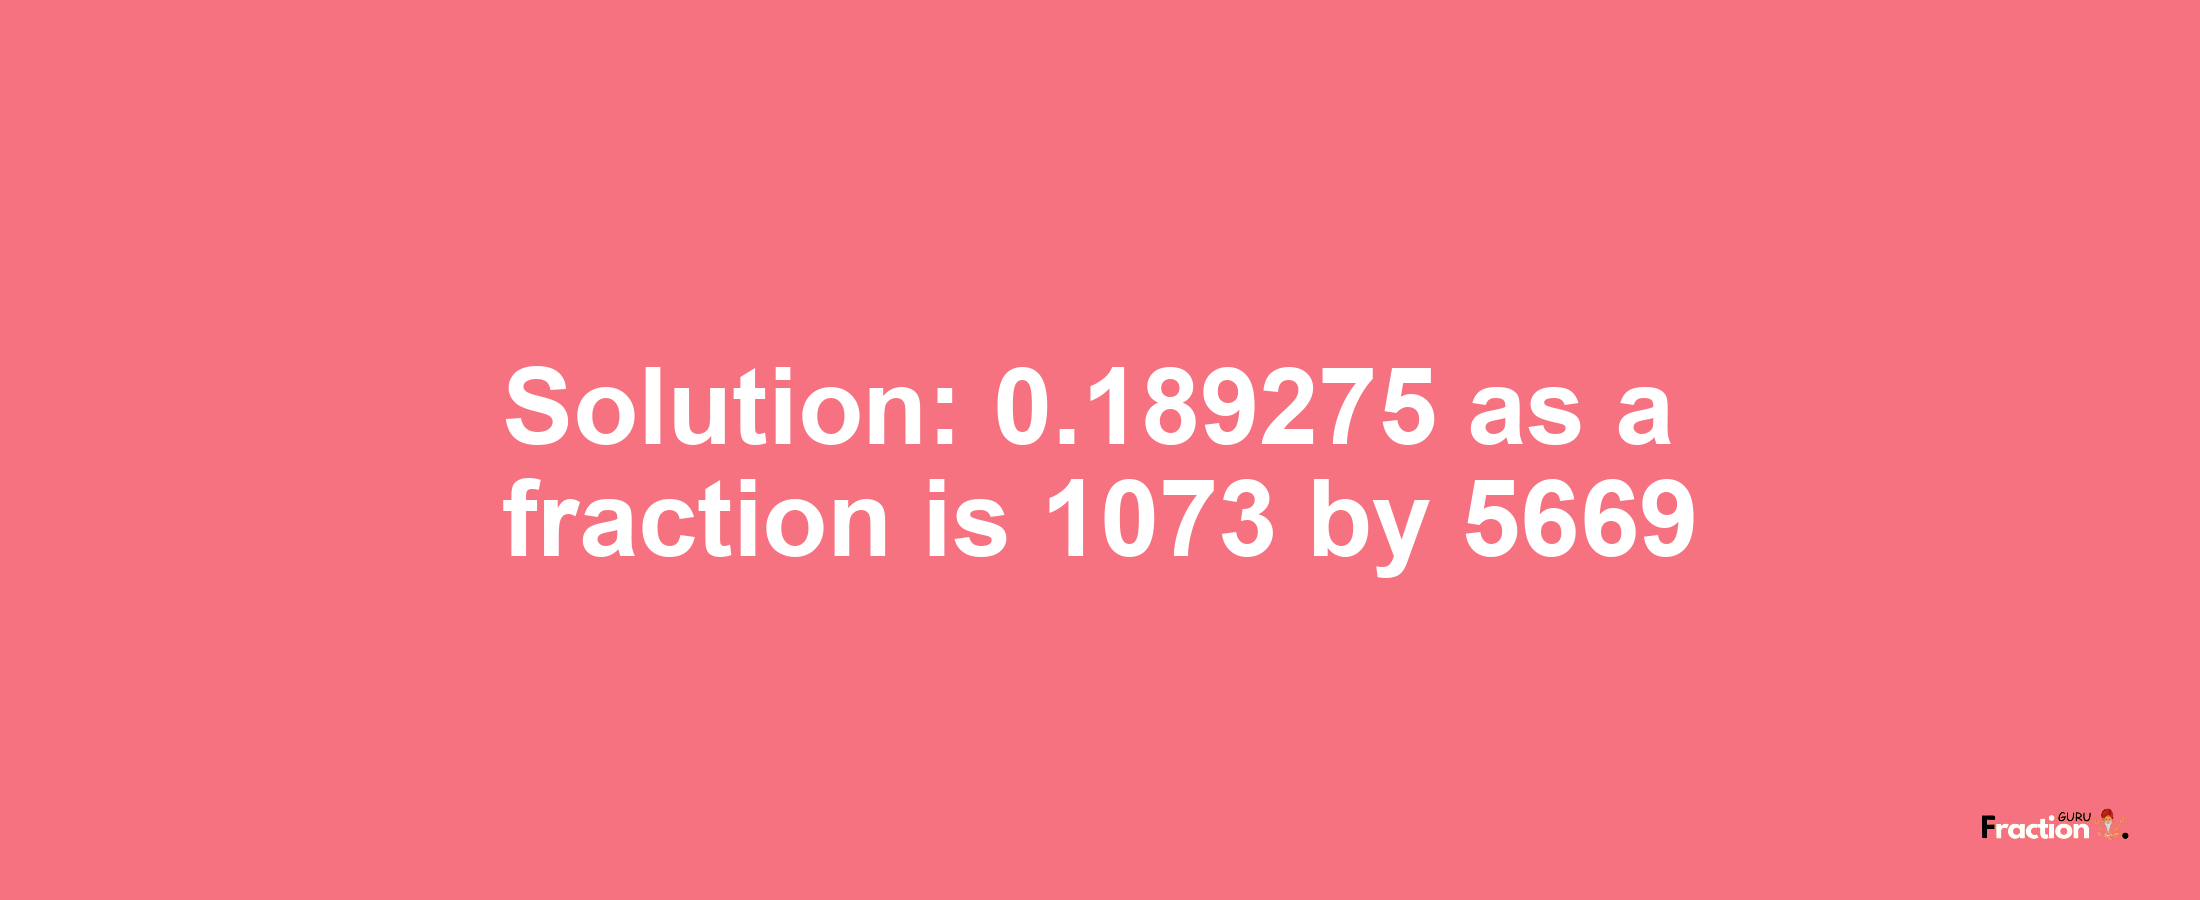 Solution:0.189275 as a fraction is 1073/5669